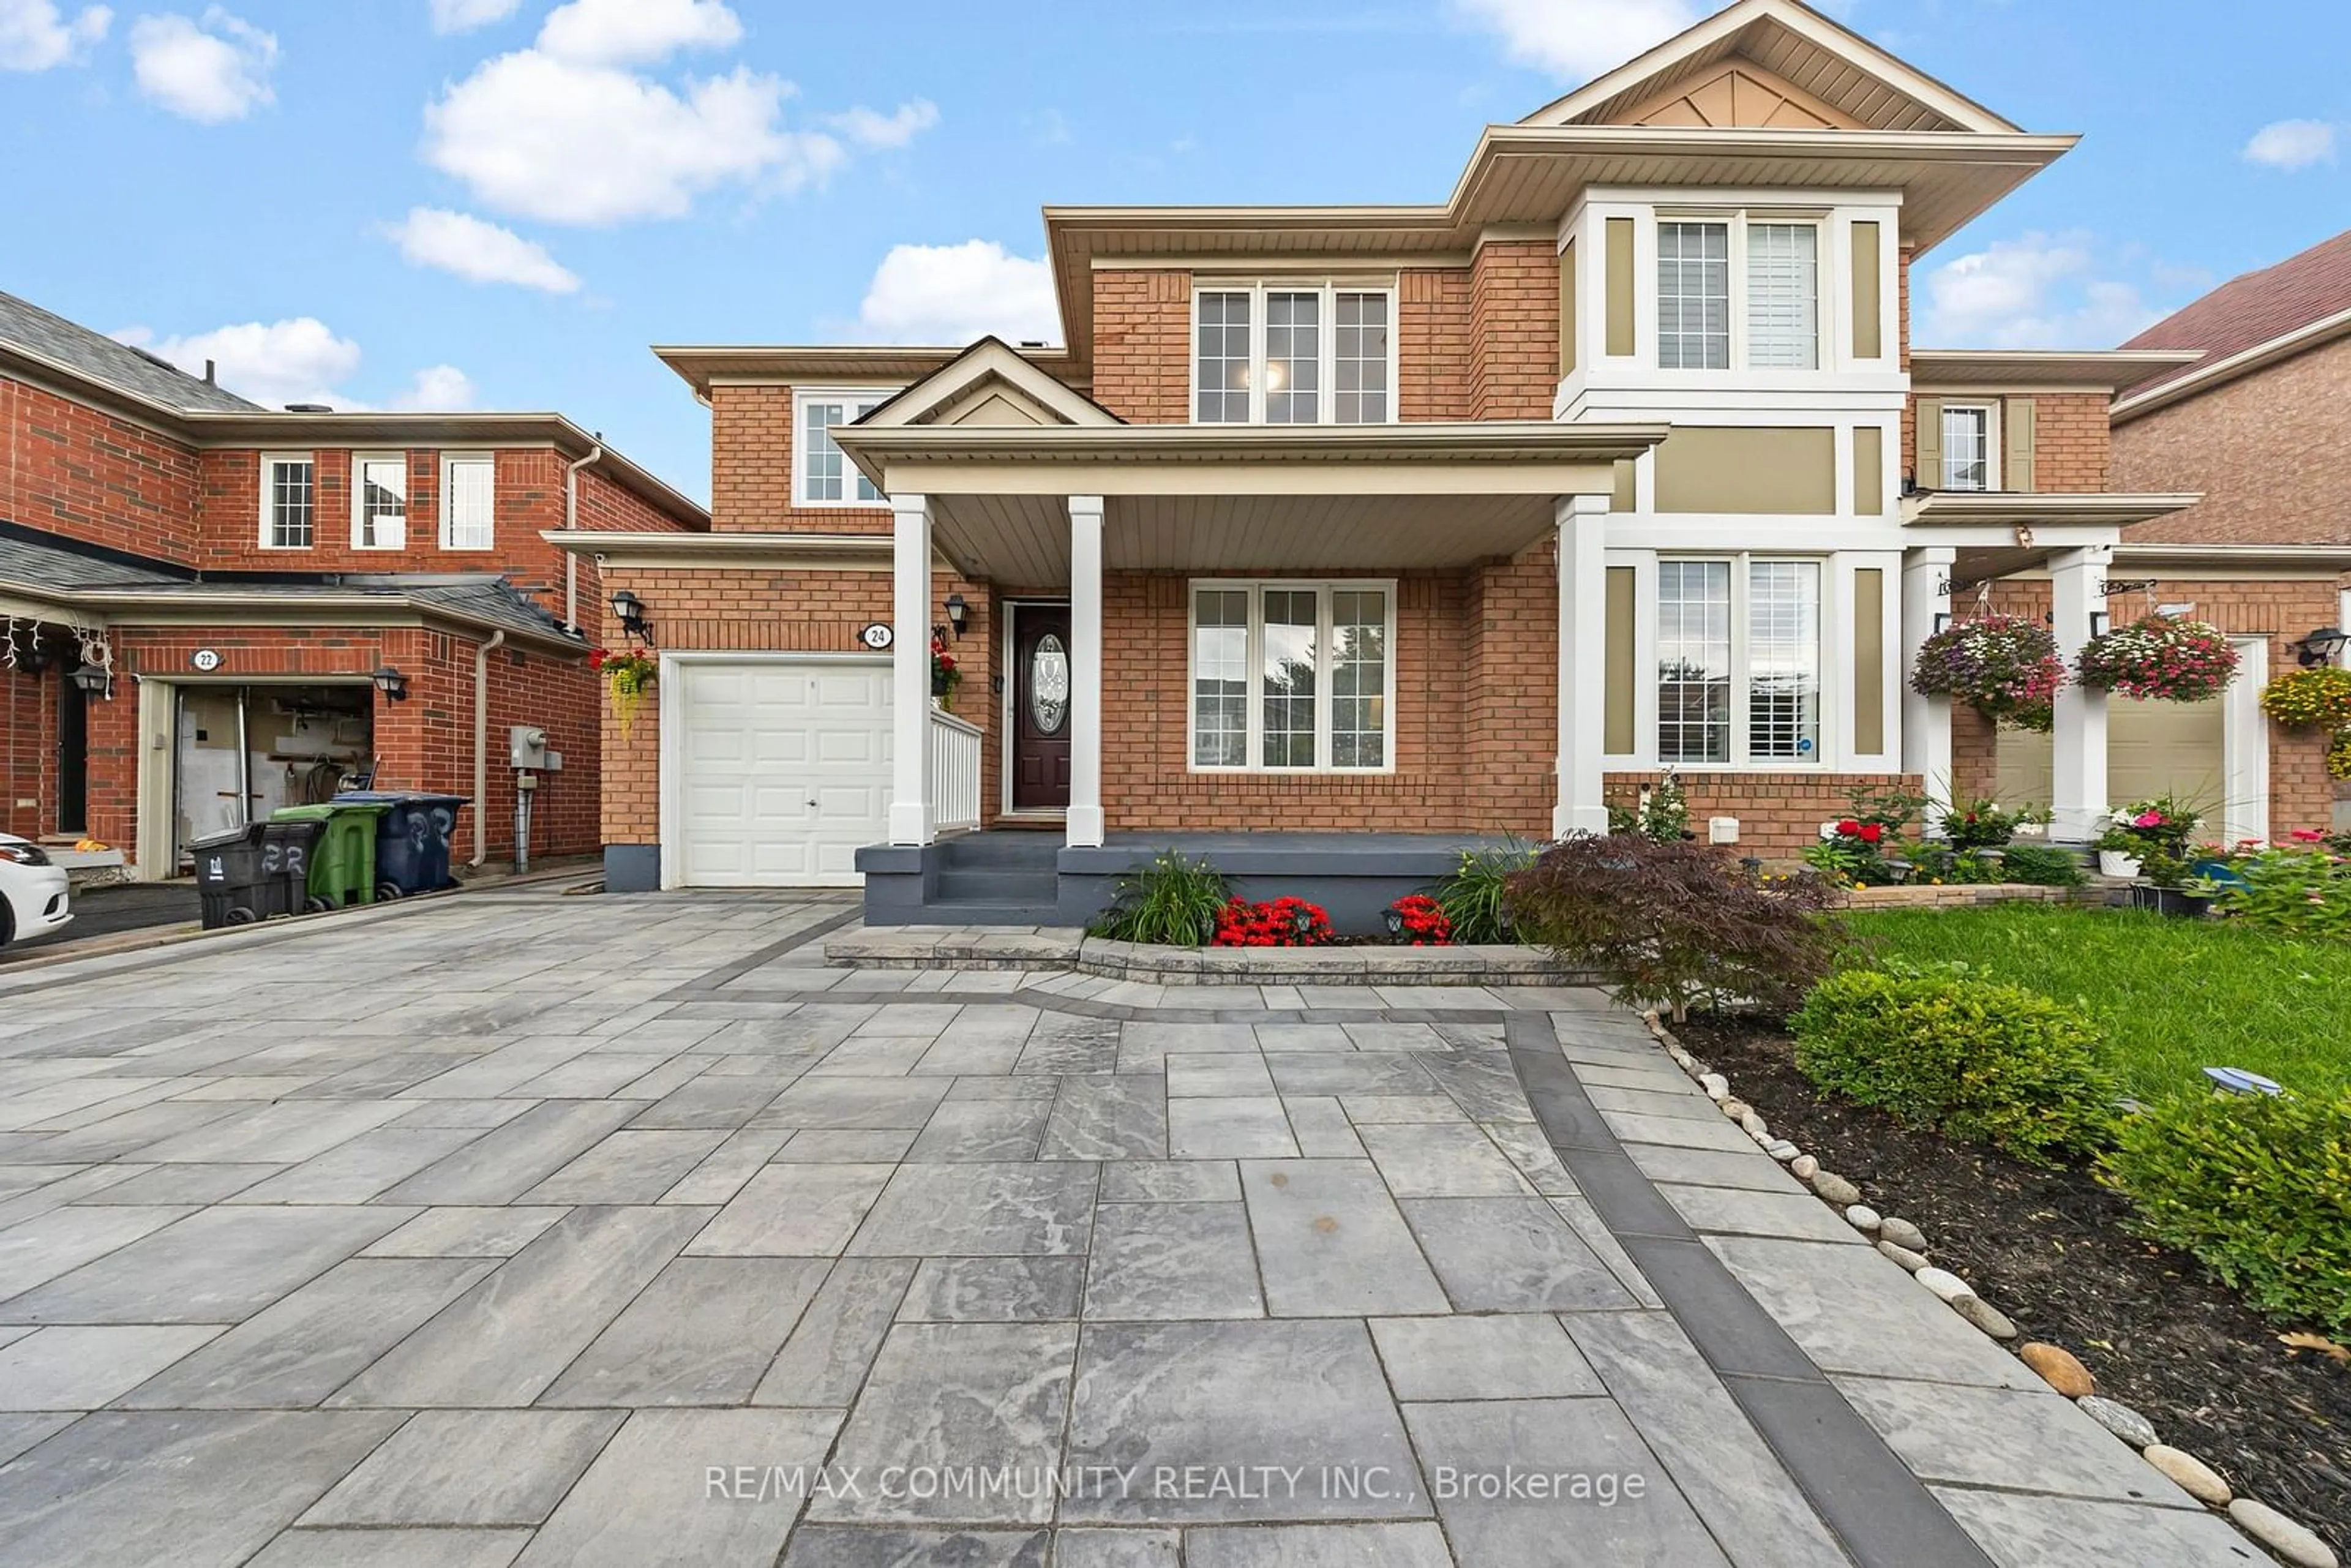 Home with brick exterior material for 24 Pitchpine Dr, Toronto Ontario M1X 1W5